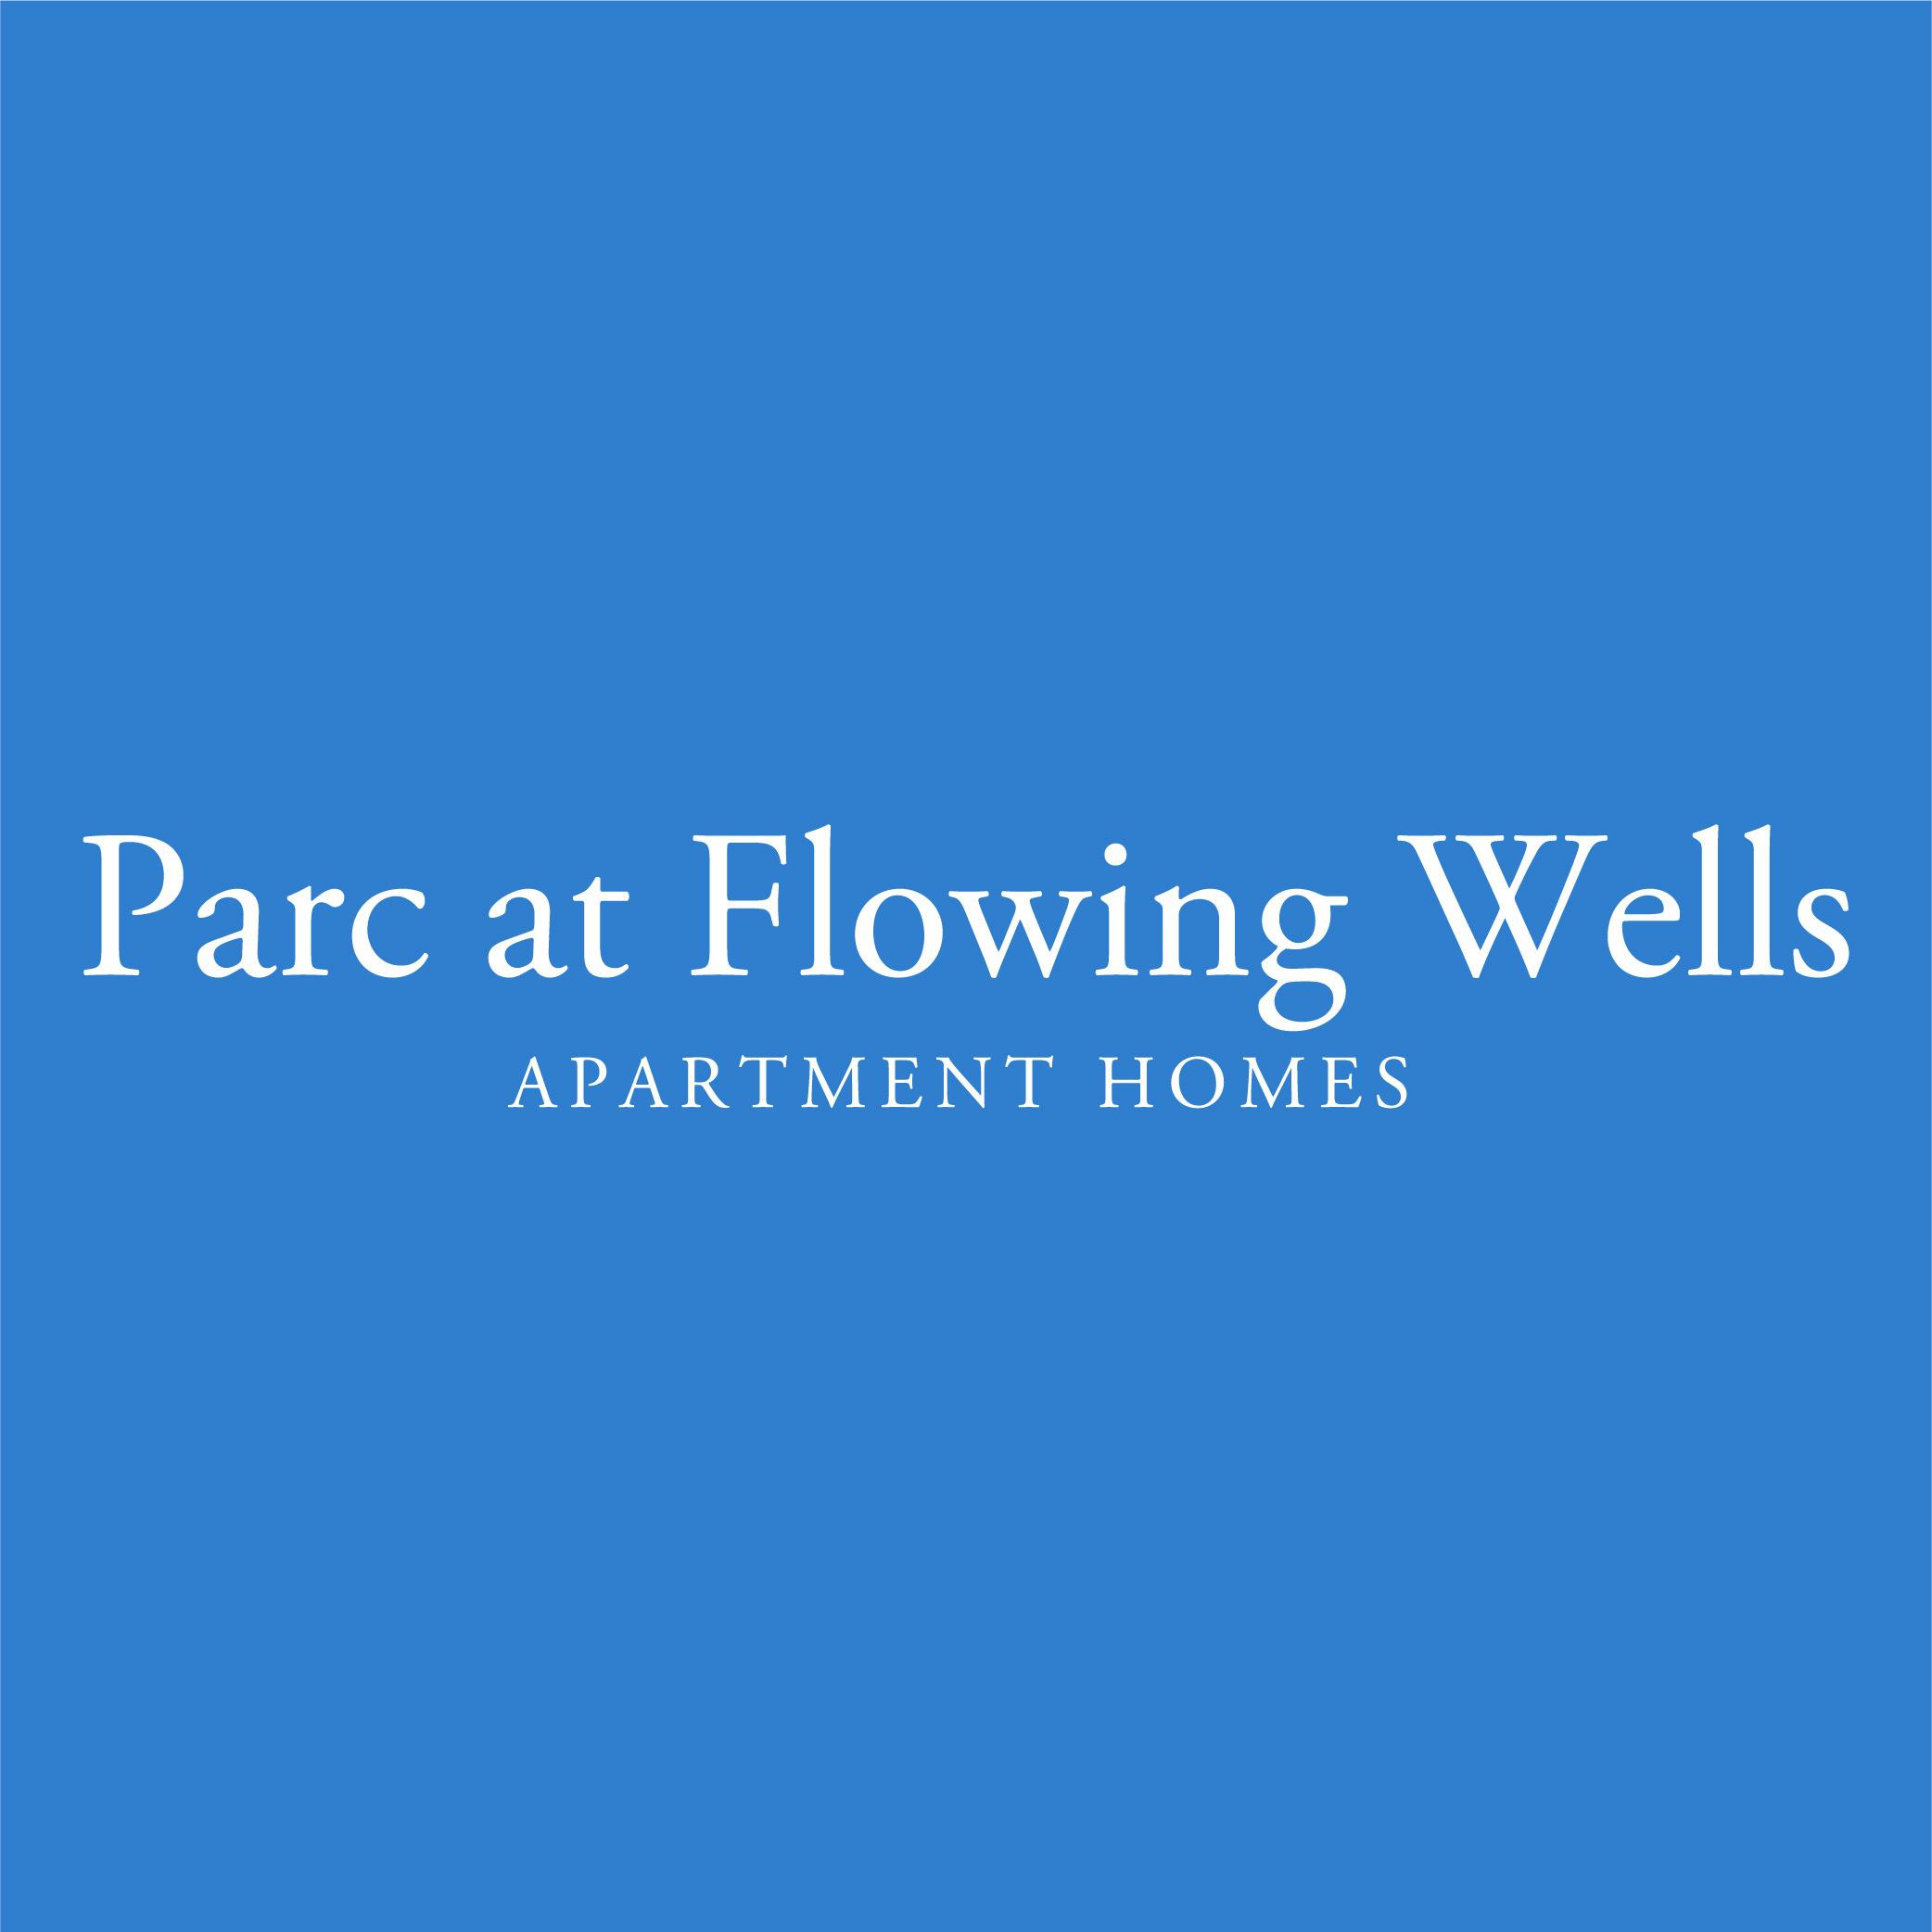 Parc at Flowing Wells Apartment Homes